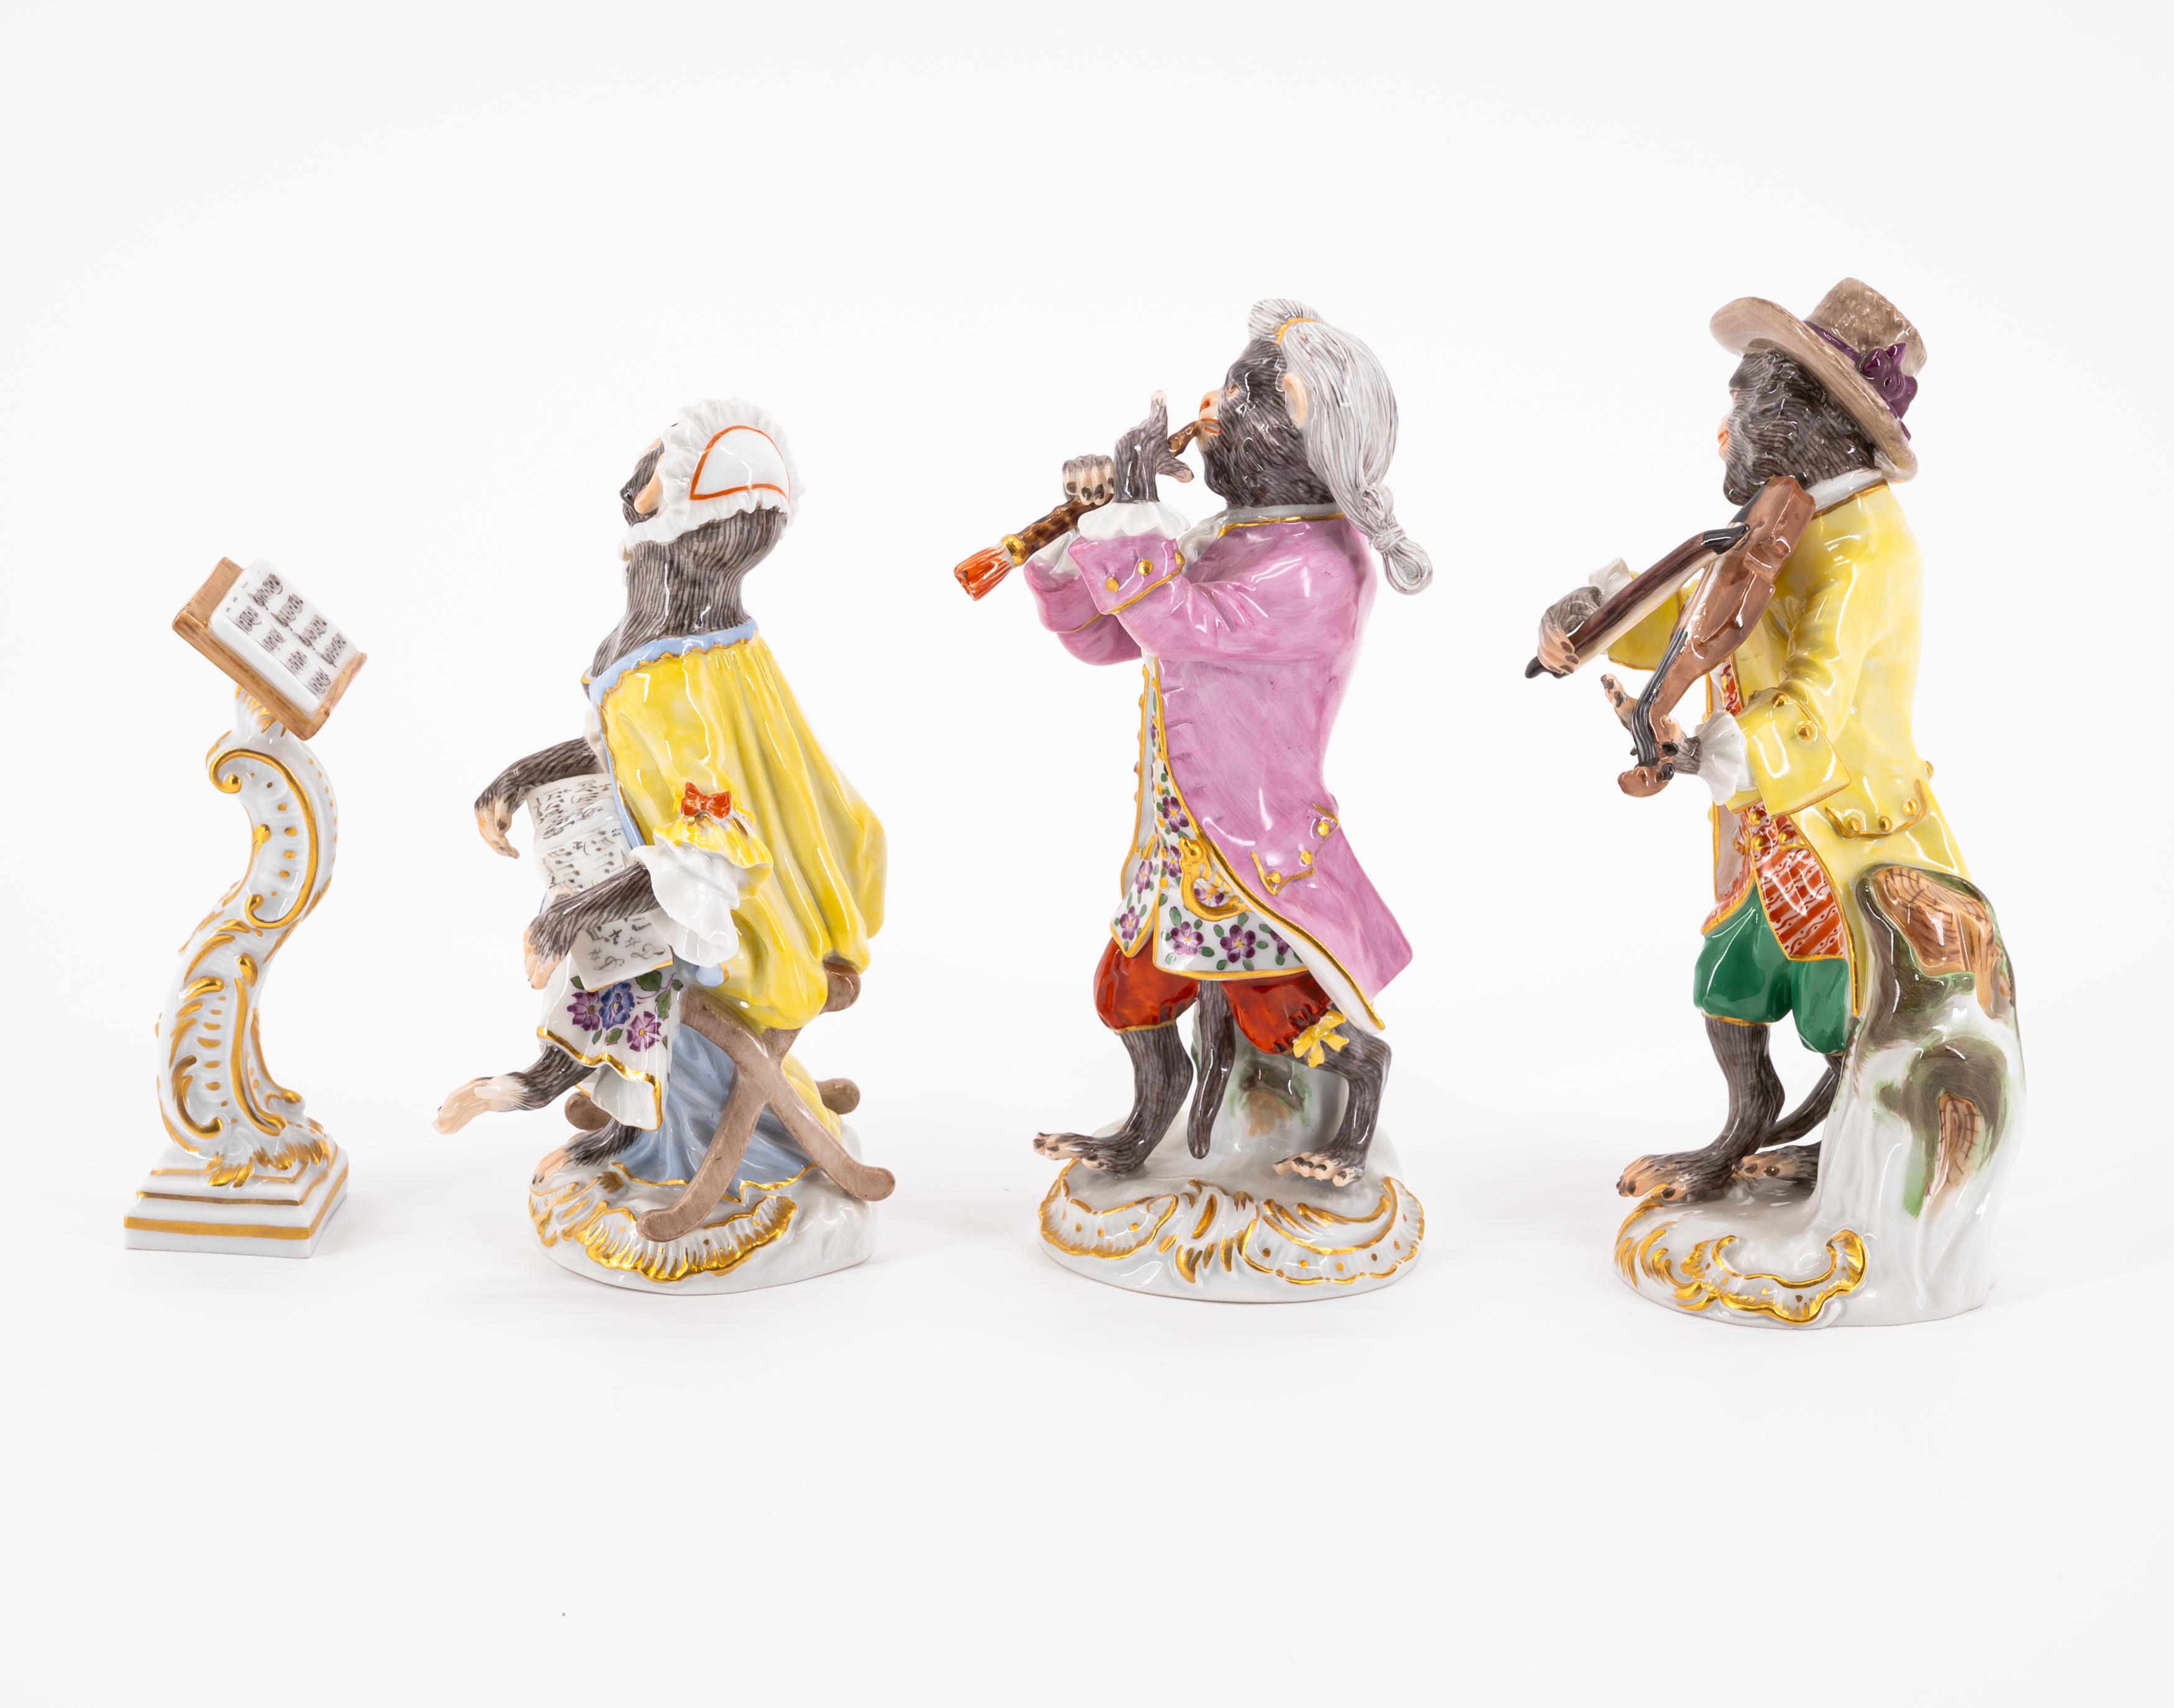 21 PORCELAIN FIGURES FROM THE MONKEY CHAPEL - Image 23 of 27